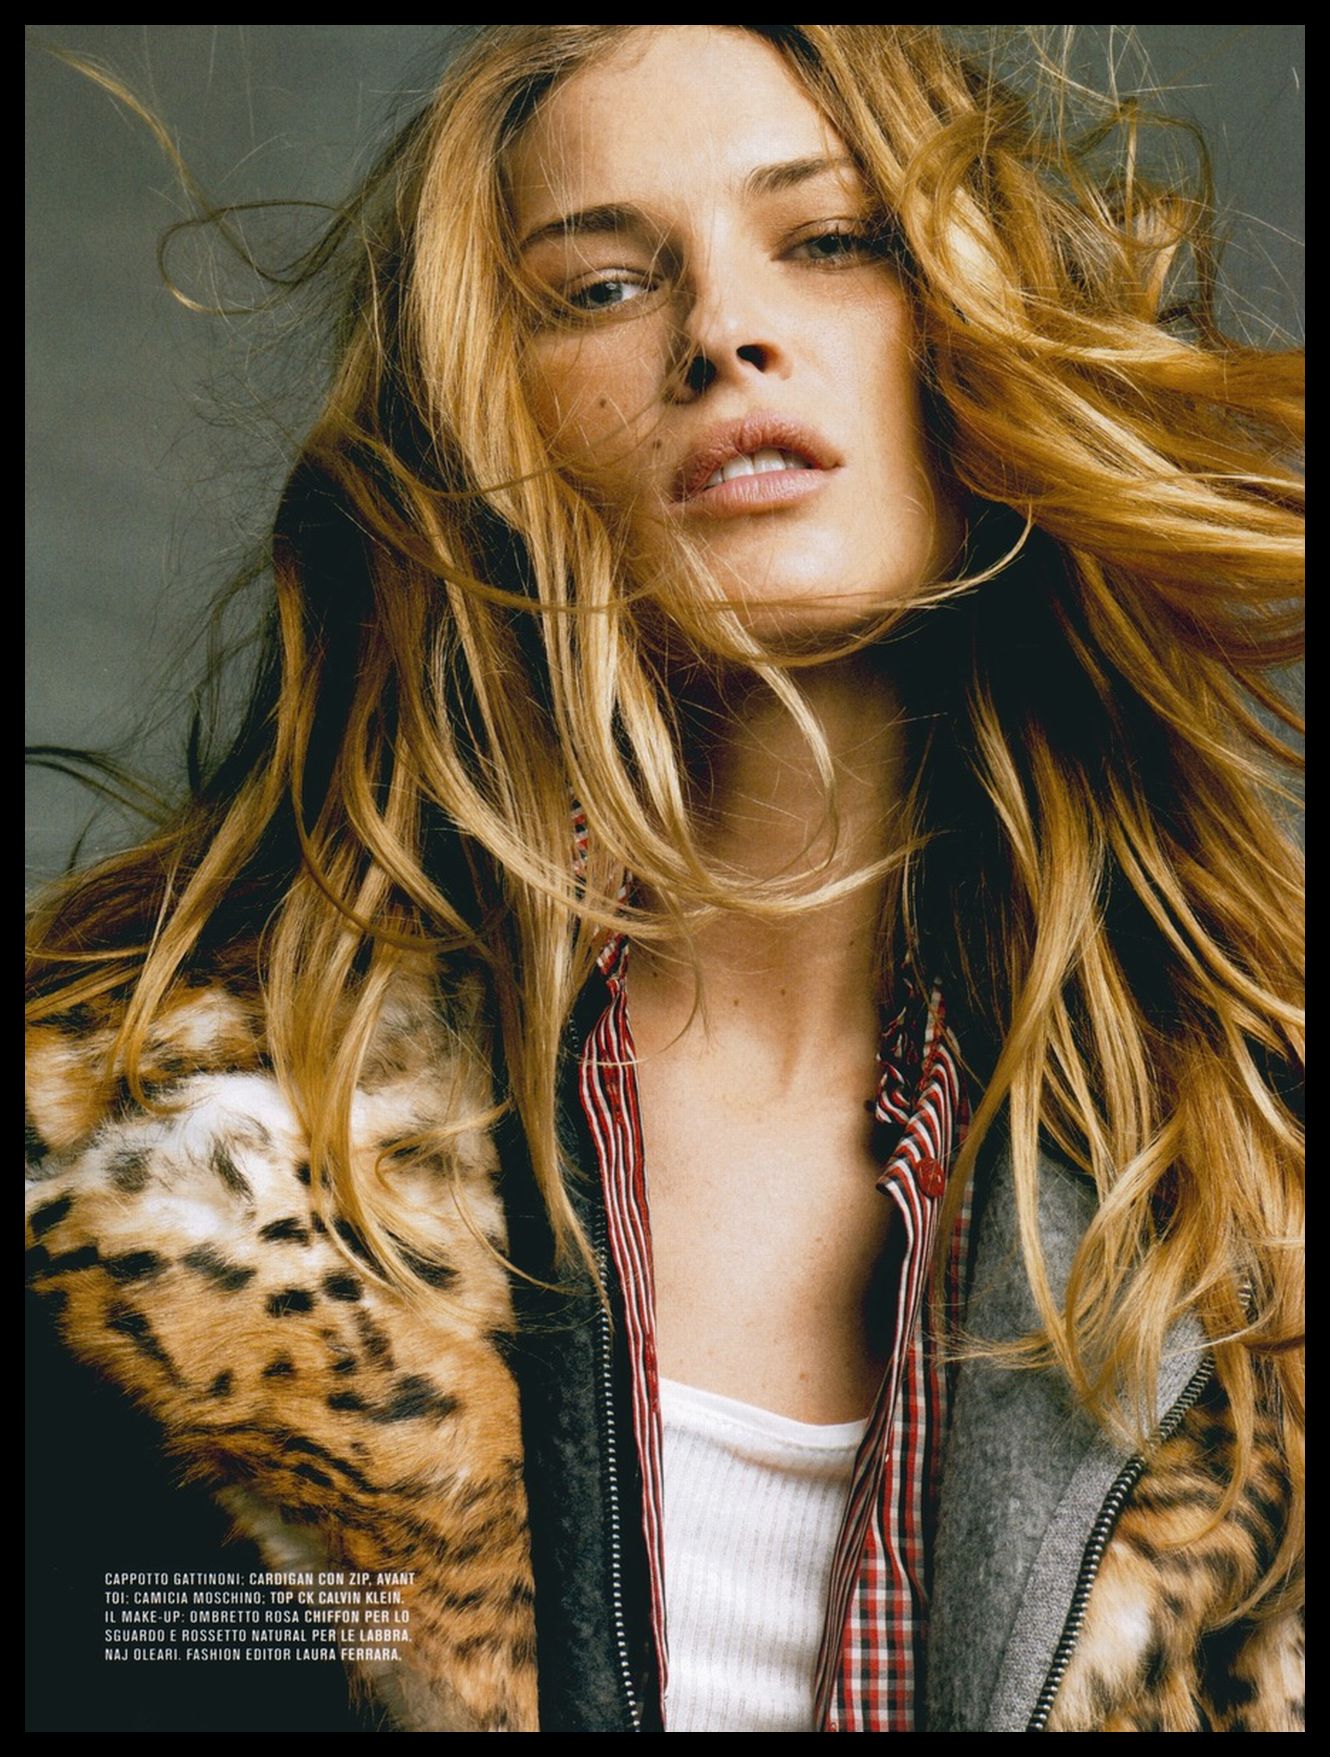 Erin Wasson photo 65 of 529 pics, wallpaper - photo #74391 - ThePlace2